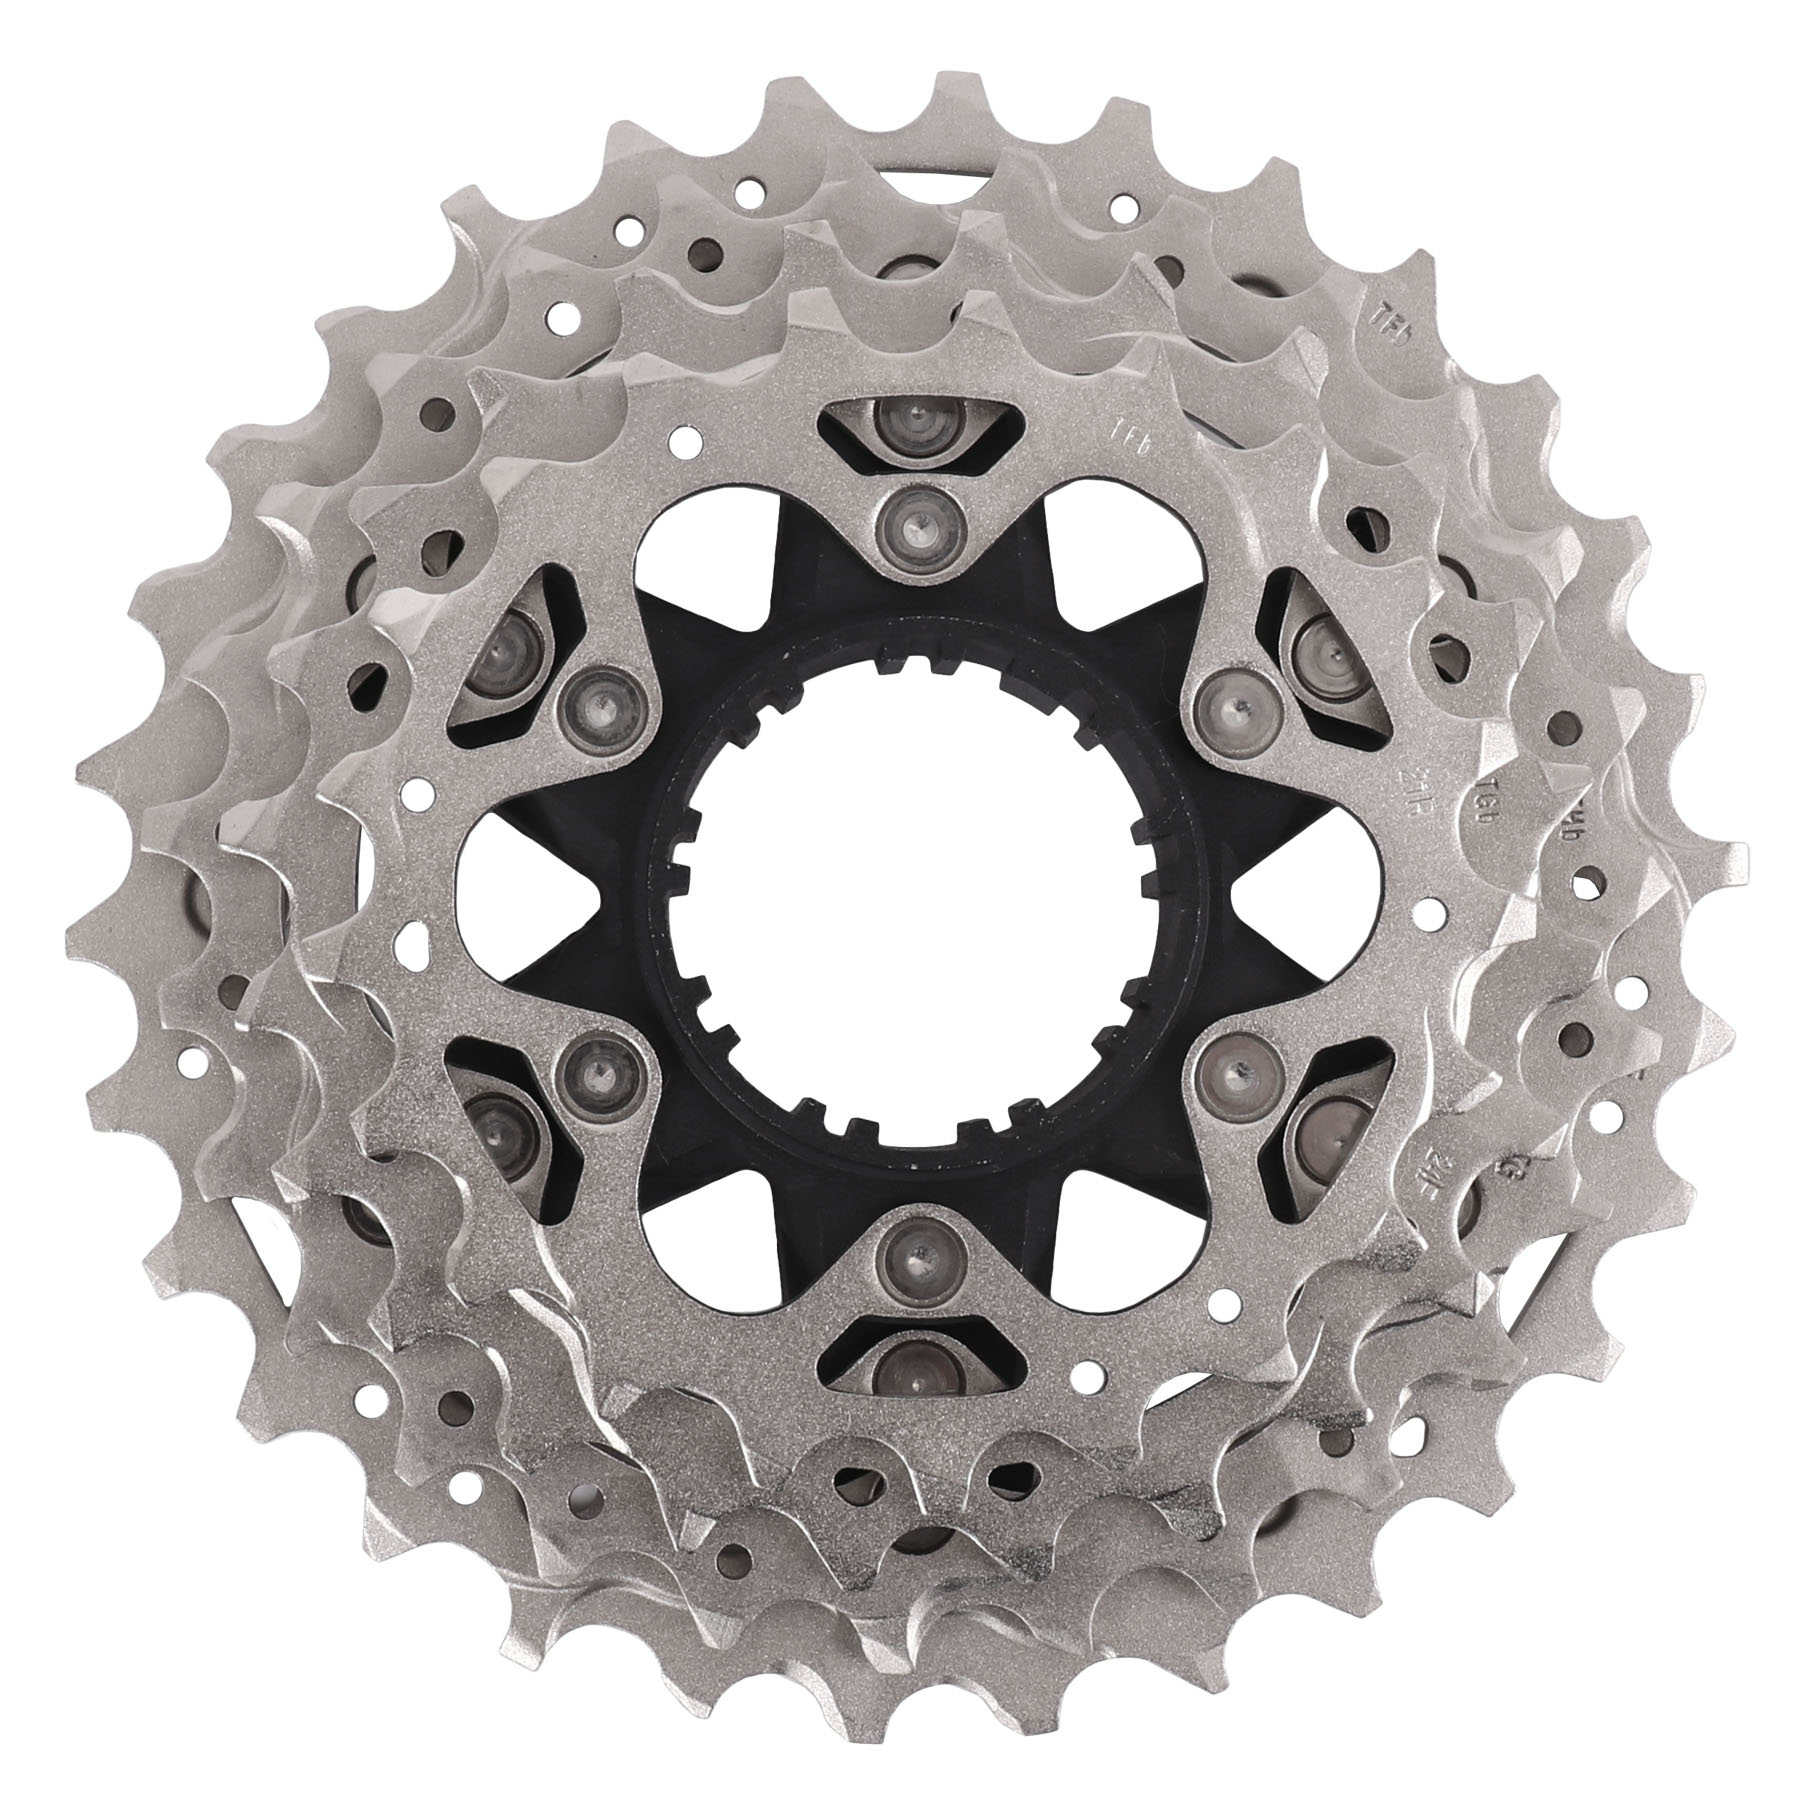 Picture of Shimano Sprocket Unit for Ultegra CS-R8100 Cassette - 21-24-27-30 Teeth | Y0NR98030